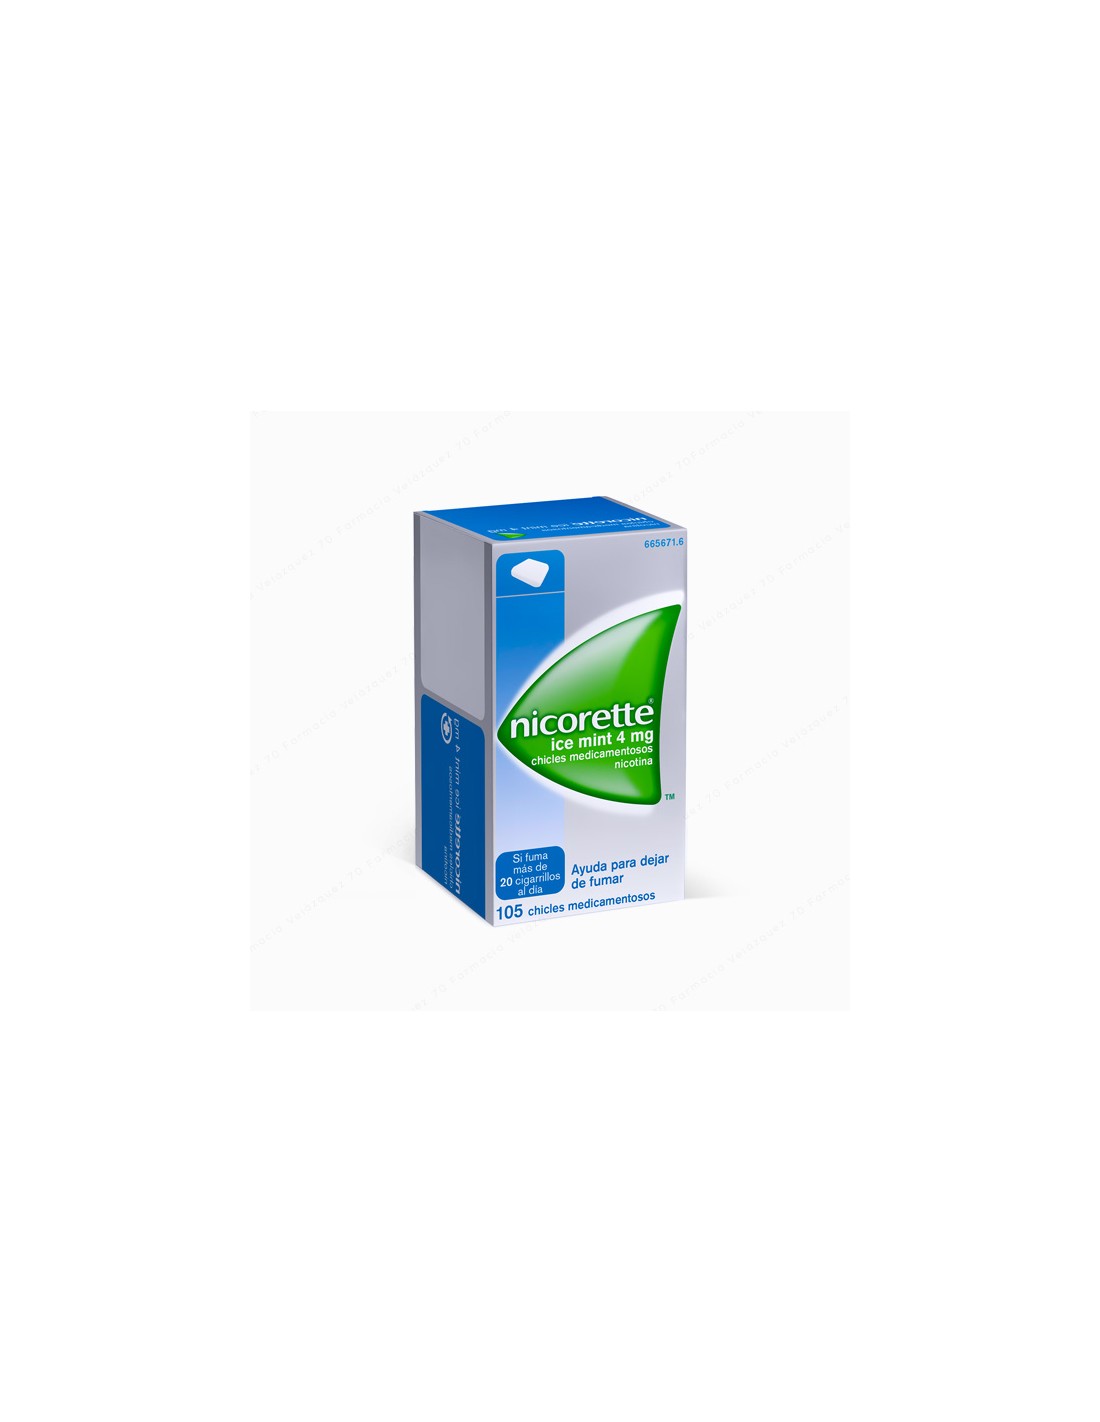 NICORETTE ICE MINT 4 mg 30 CHICLES MEDICAMENTOSOS